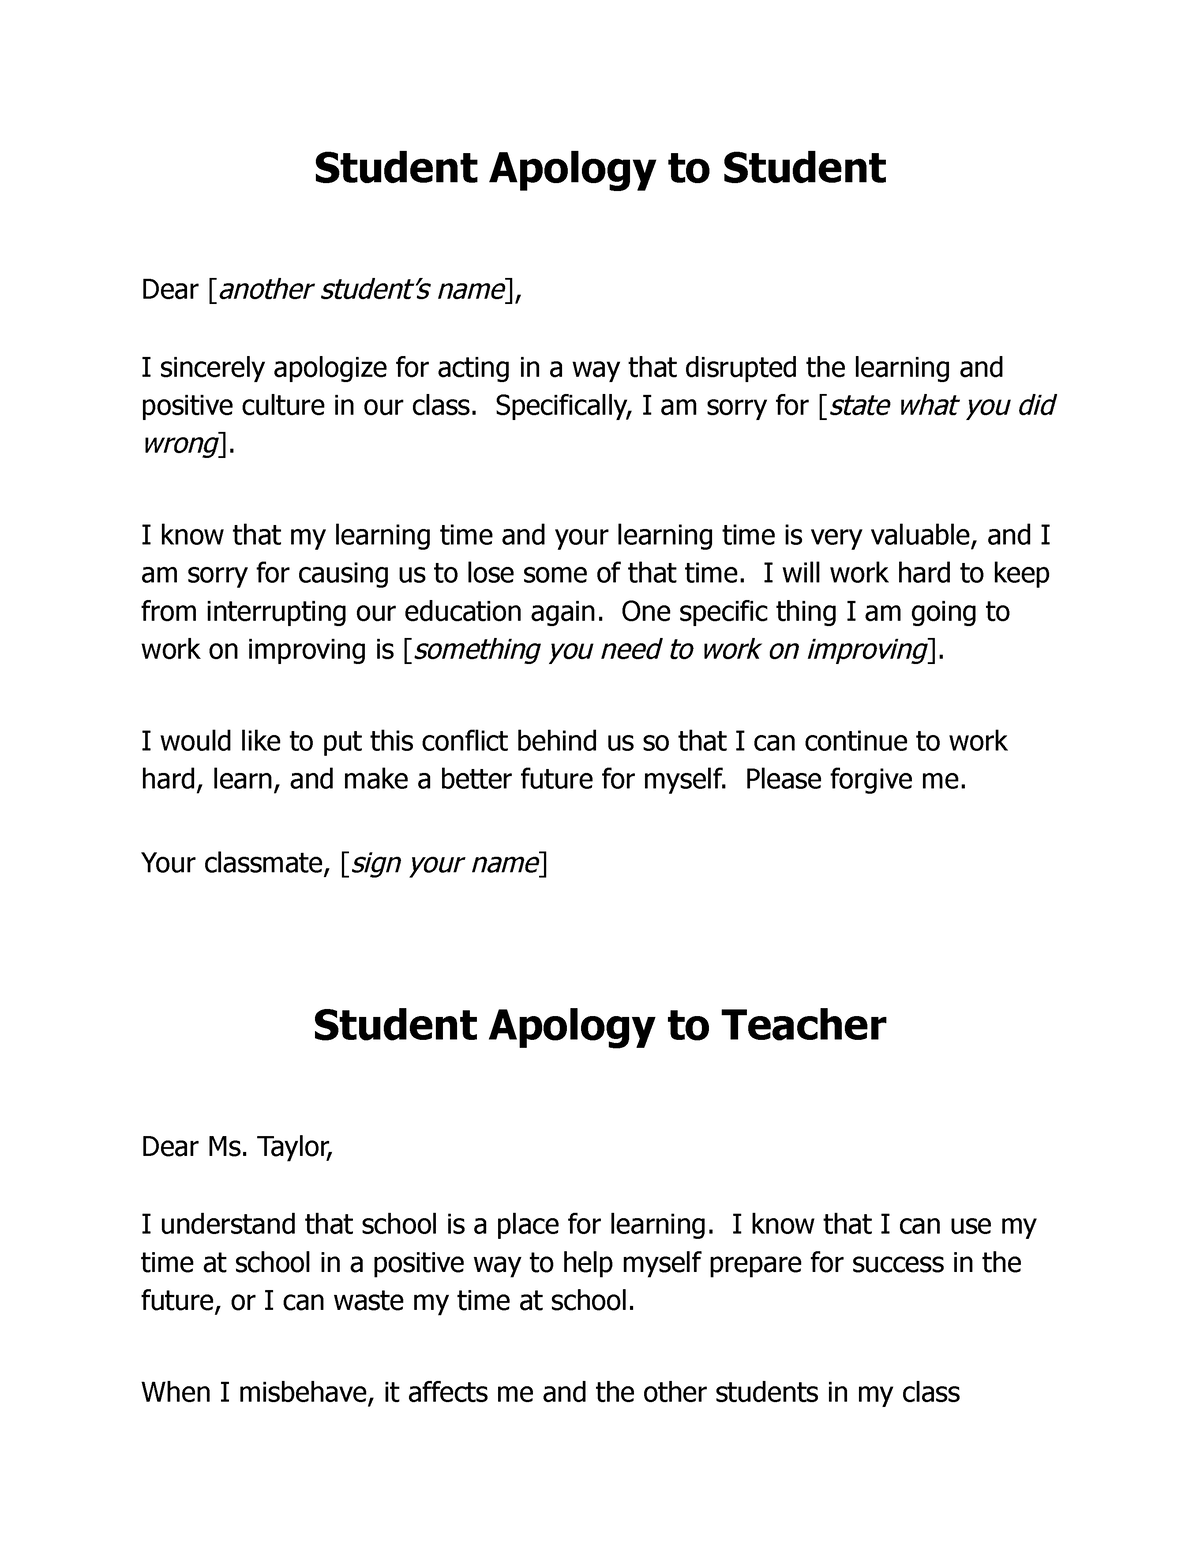 student-apology-letters-student-apology-to-student-dear-another